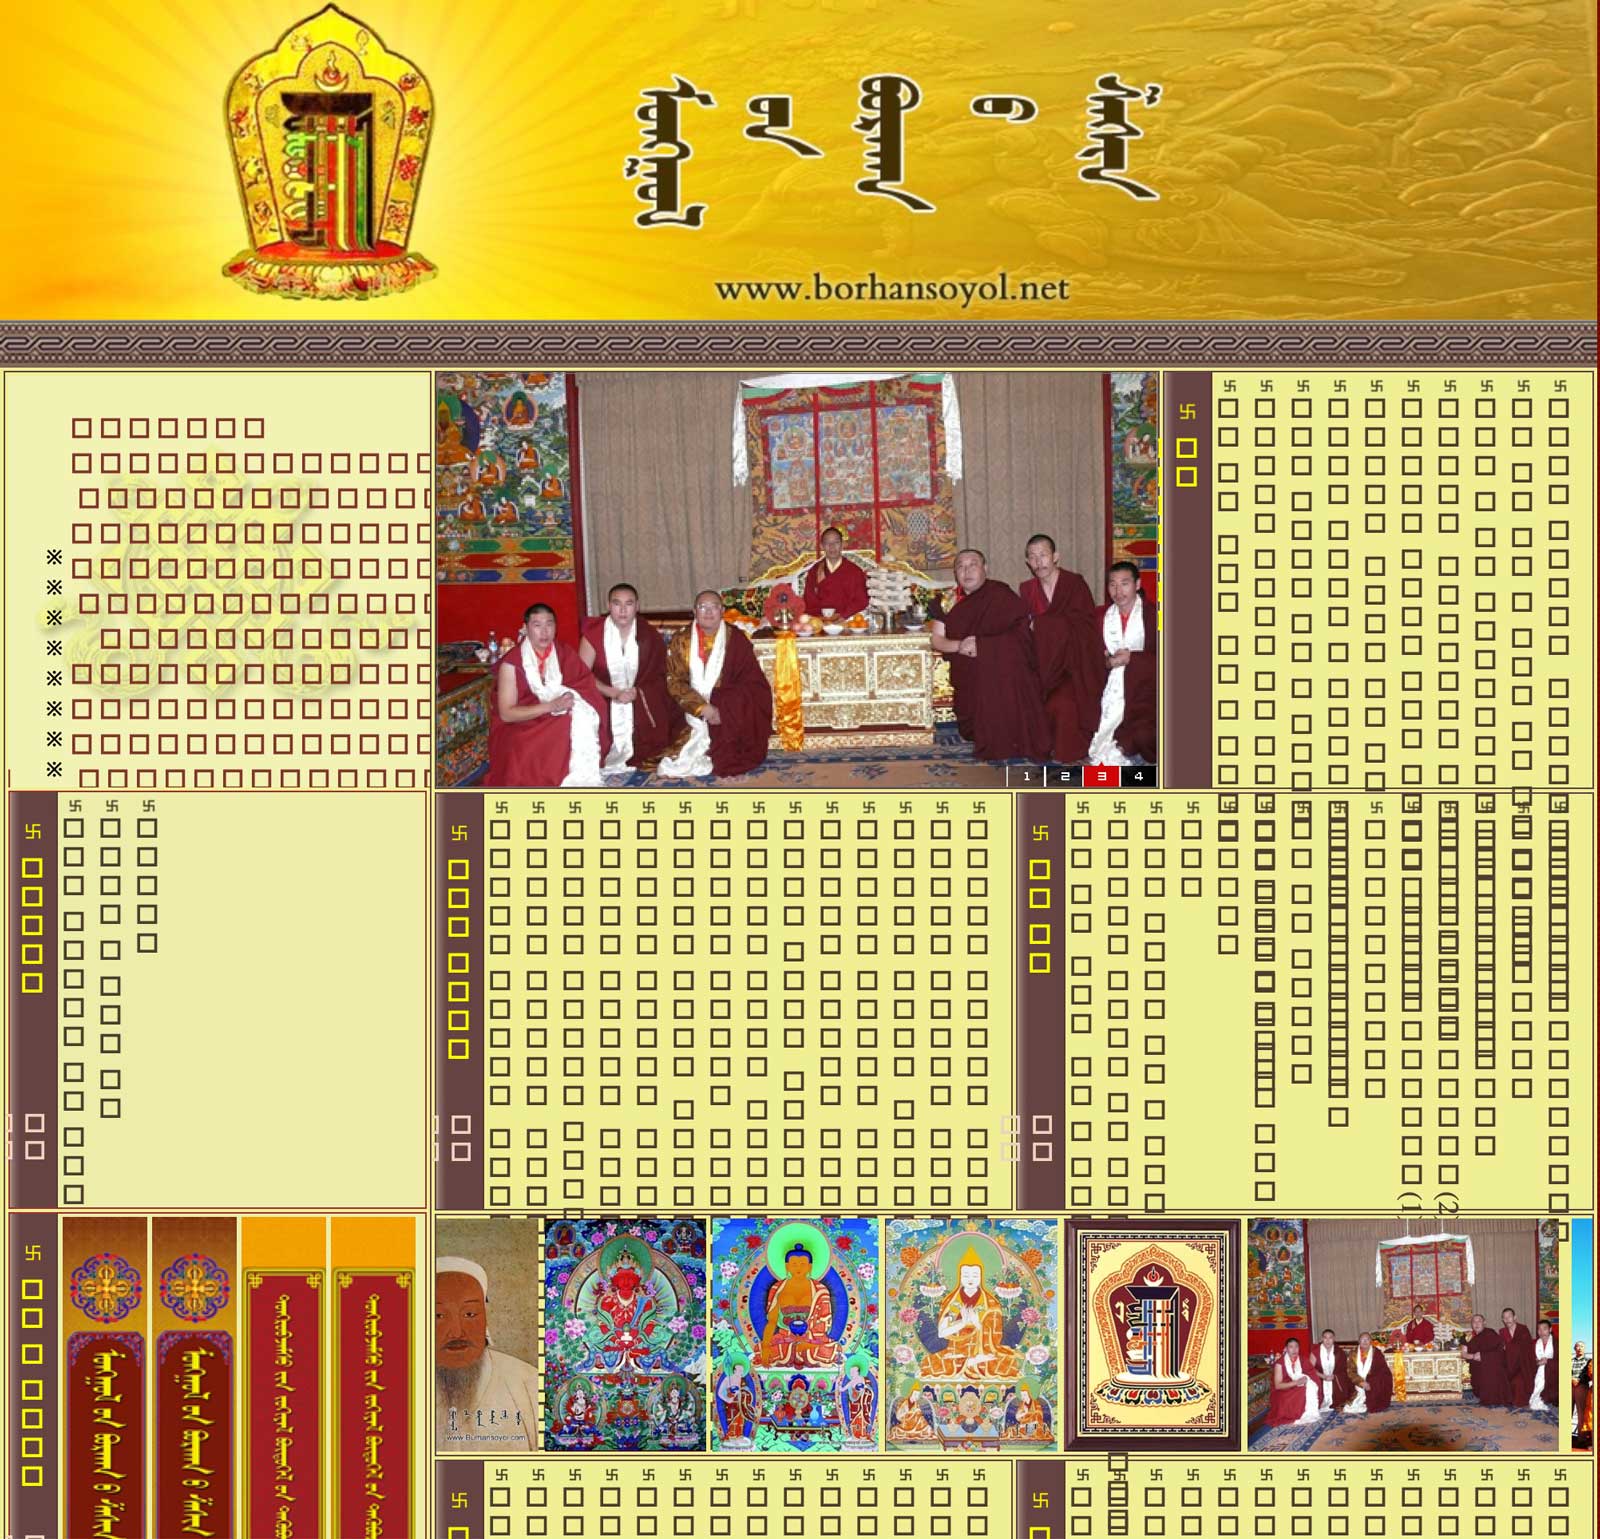 Image 6: Website using the traditional Mongolian script accessed from a standard browser.